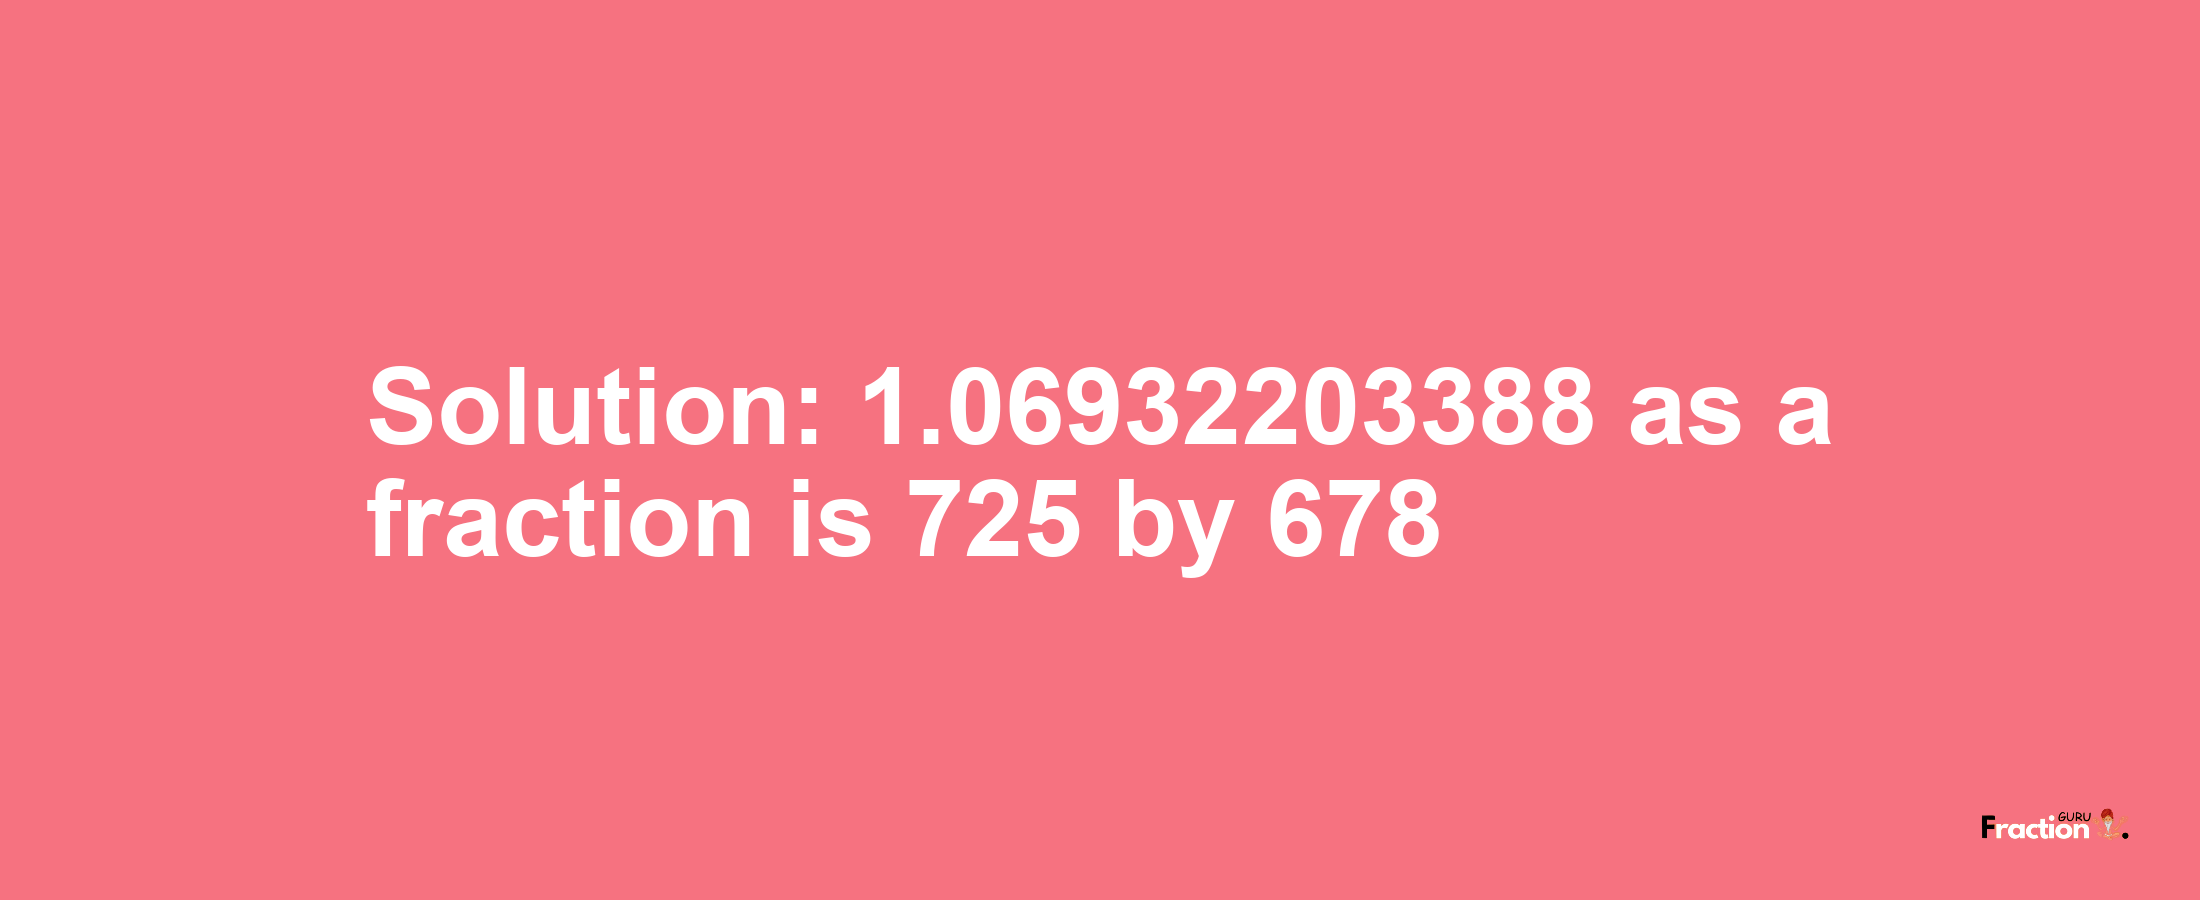 Solution:1.06932203388 as a fraction is 725/678